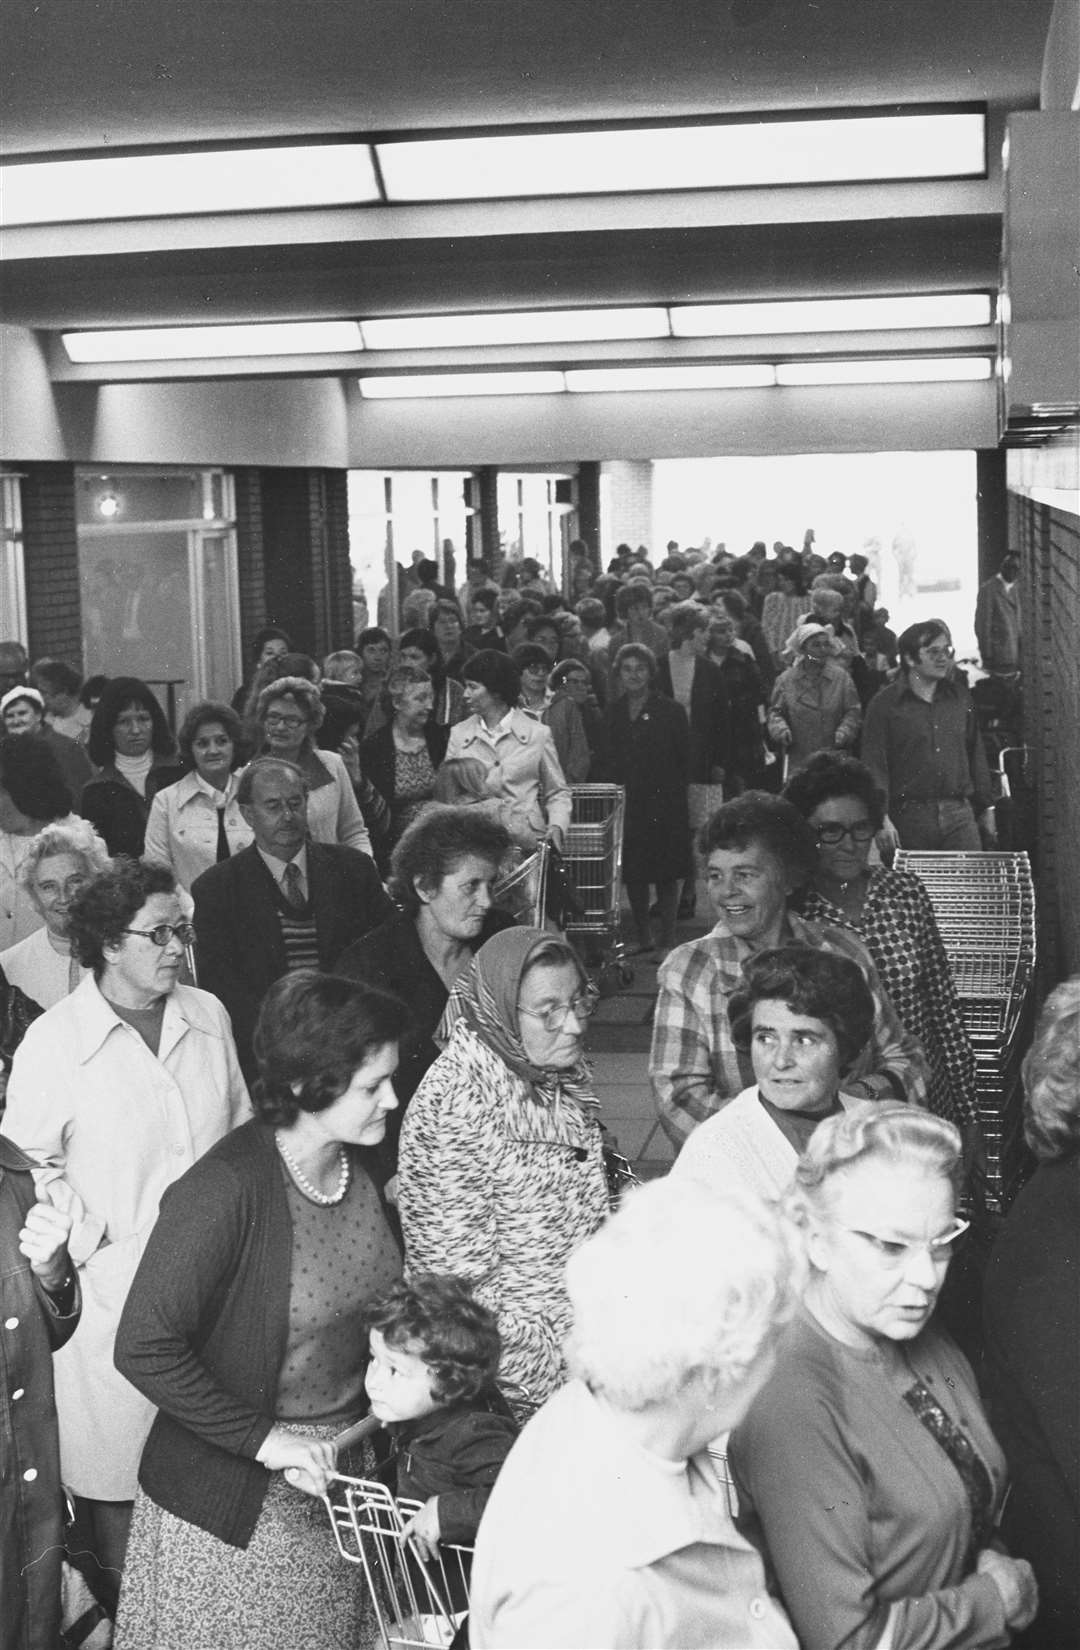 A sign of the times? See how many men you can spot in this picture of opening day at the Sainsbury's store in Sittingbourne's Bell Shopping Centre, 1976. Picture: The Sainsbury Archive, Museum of London Docklands